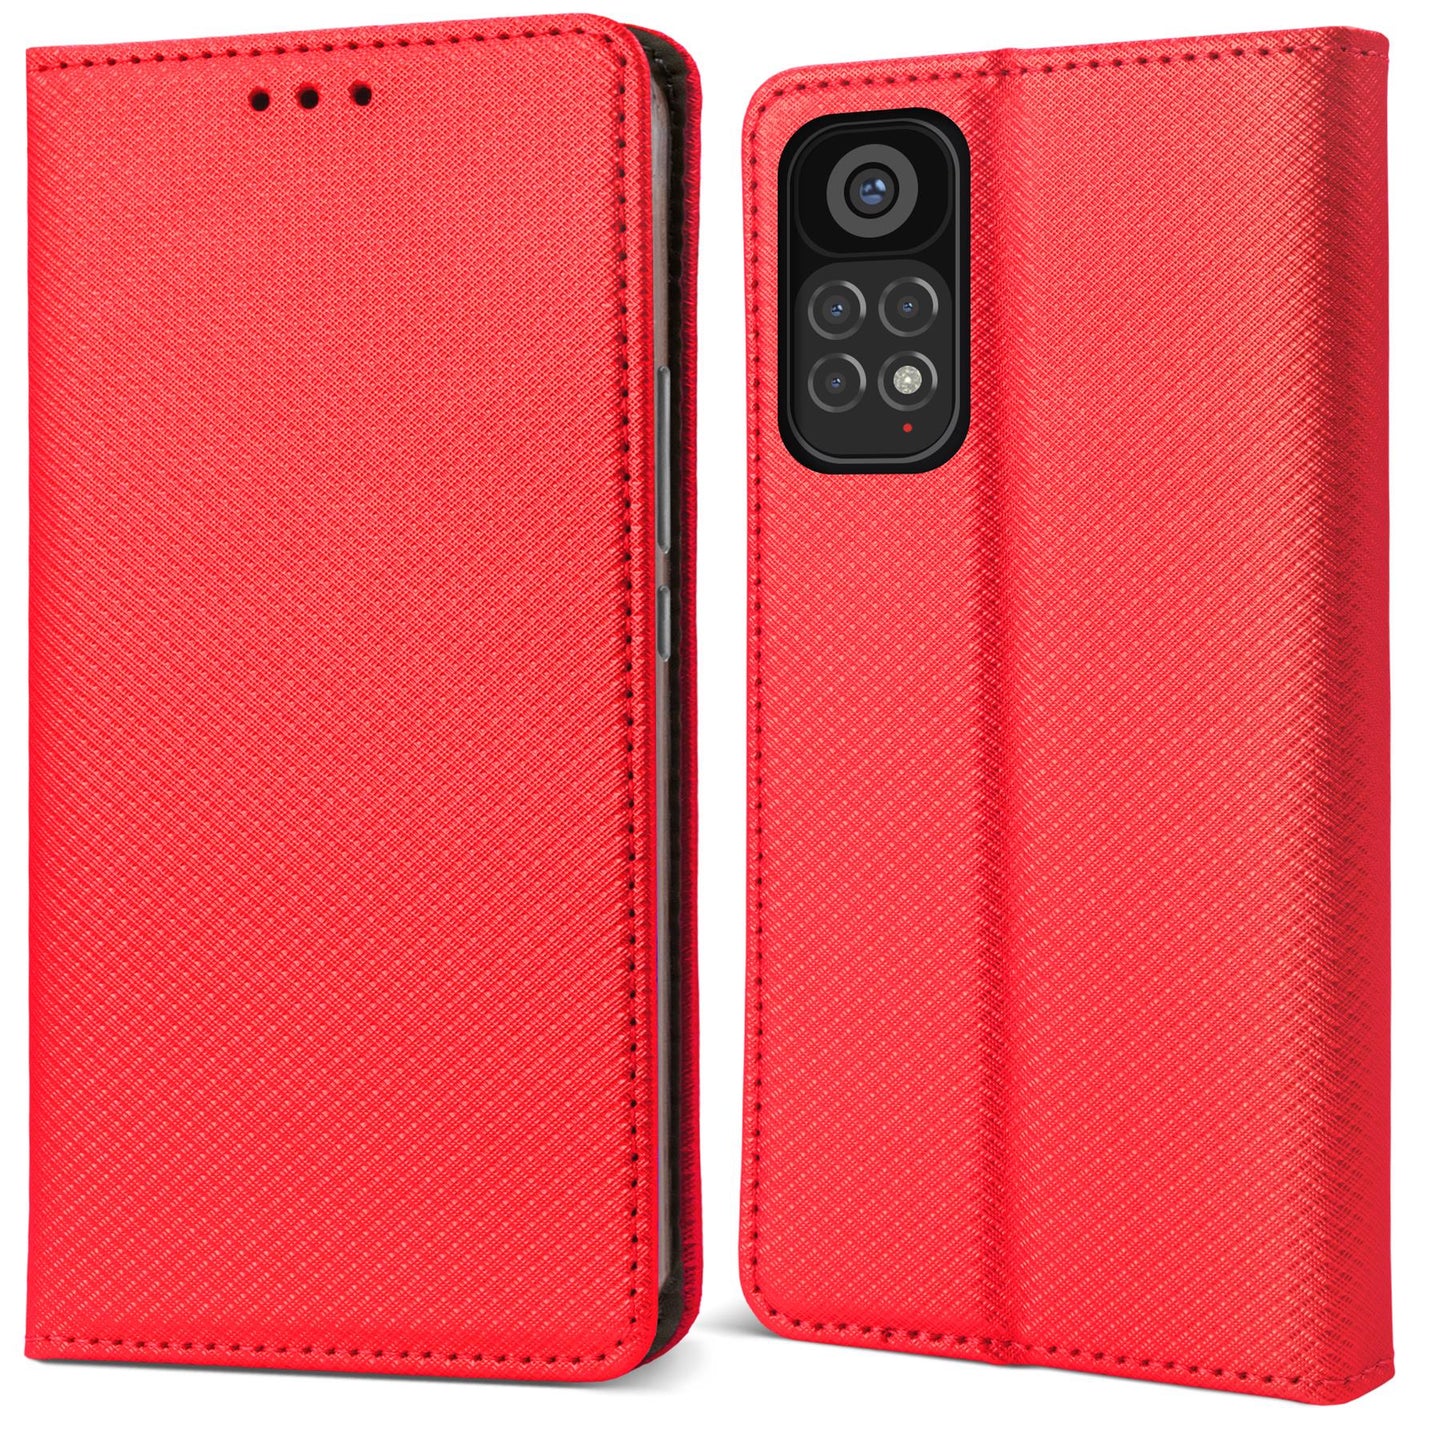 Moozy Case Flip Cover for Xiaomi Redmi Note 11 / 11S, Red - Smart Magnetic Flip Case Flip Folio Wallet Case with Card Holder and Stand, Credit Card Slots, Kickstand Function